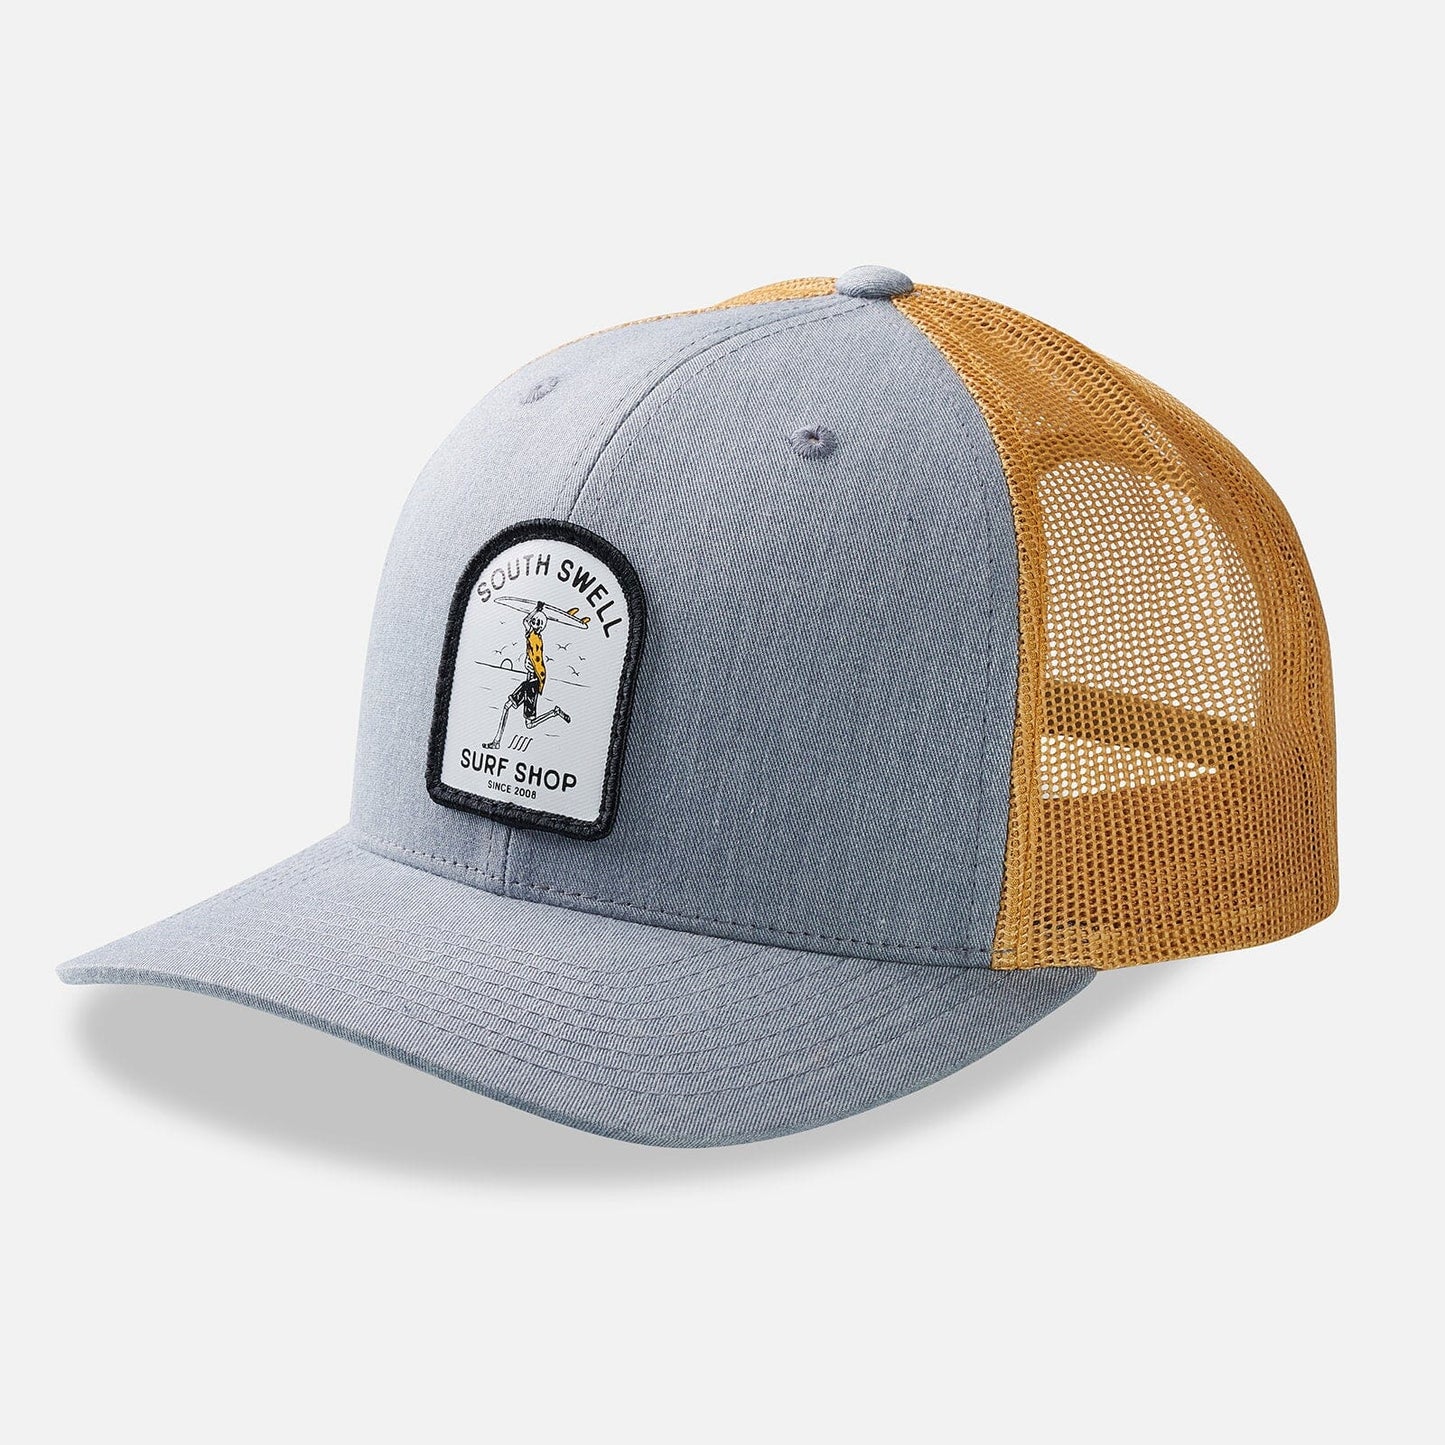 SOUTH SWELL Shred Til Dead Trucker Hat Hats SOUTH SWELL 